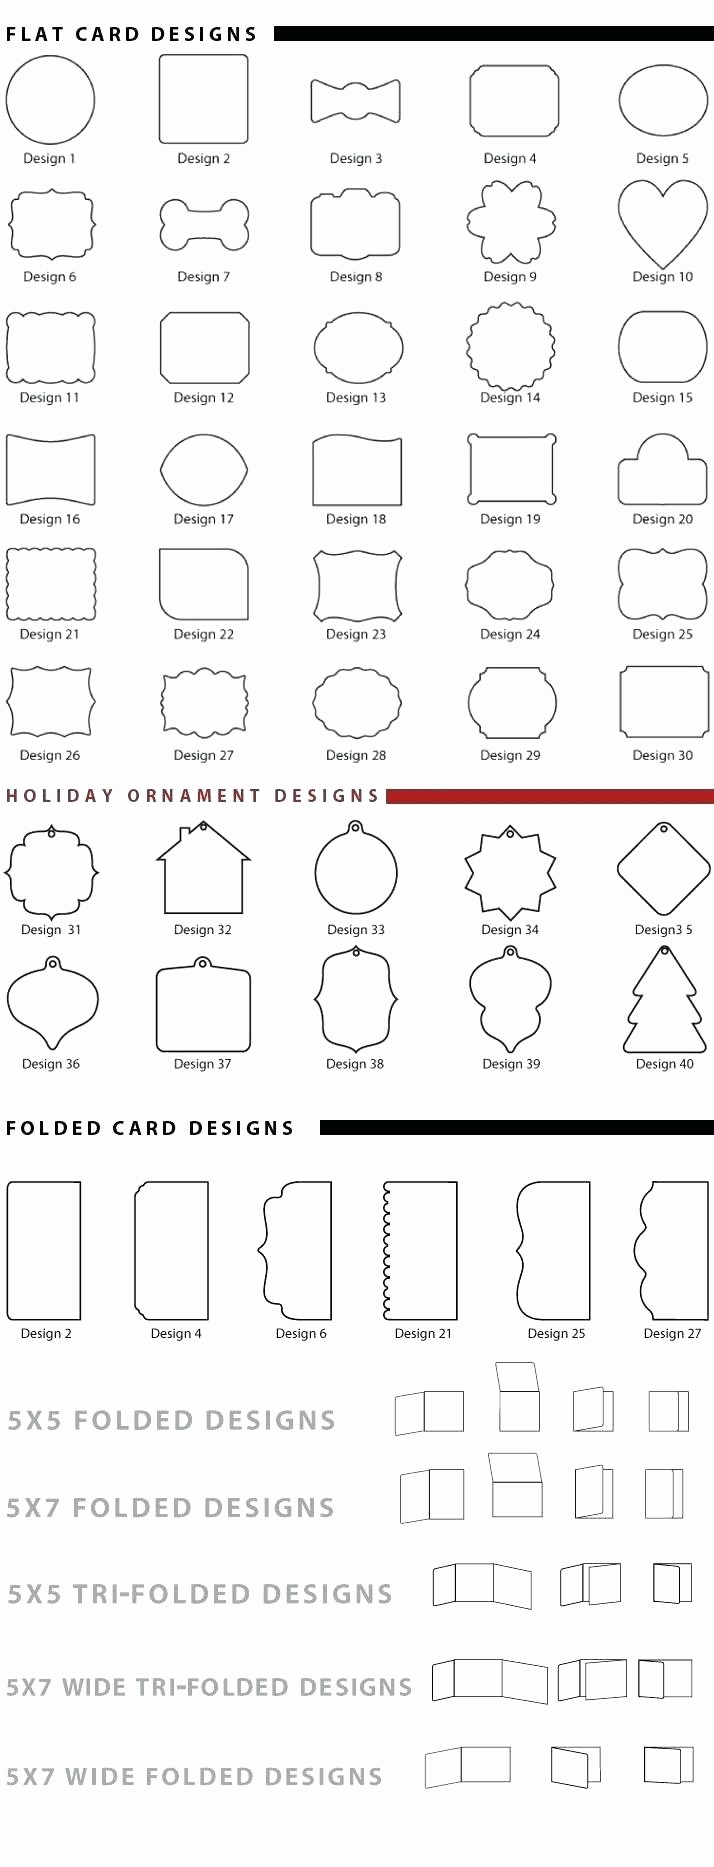 5x7 Greeting Card Template Word Best Of 5x7 Folded Card Template for Word Idealstalist